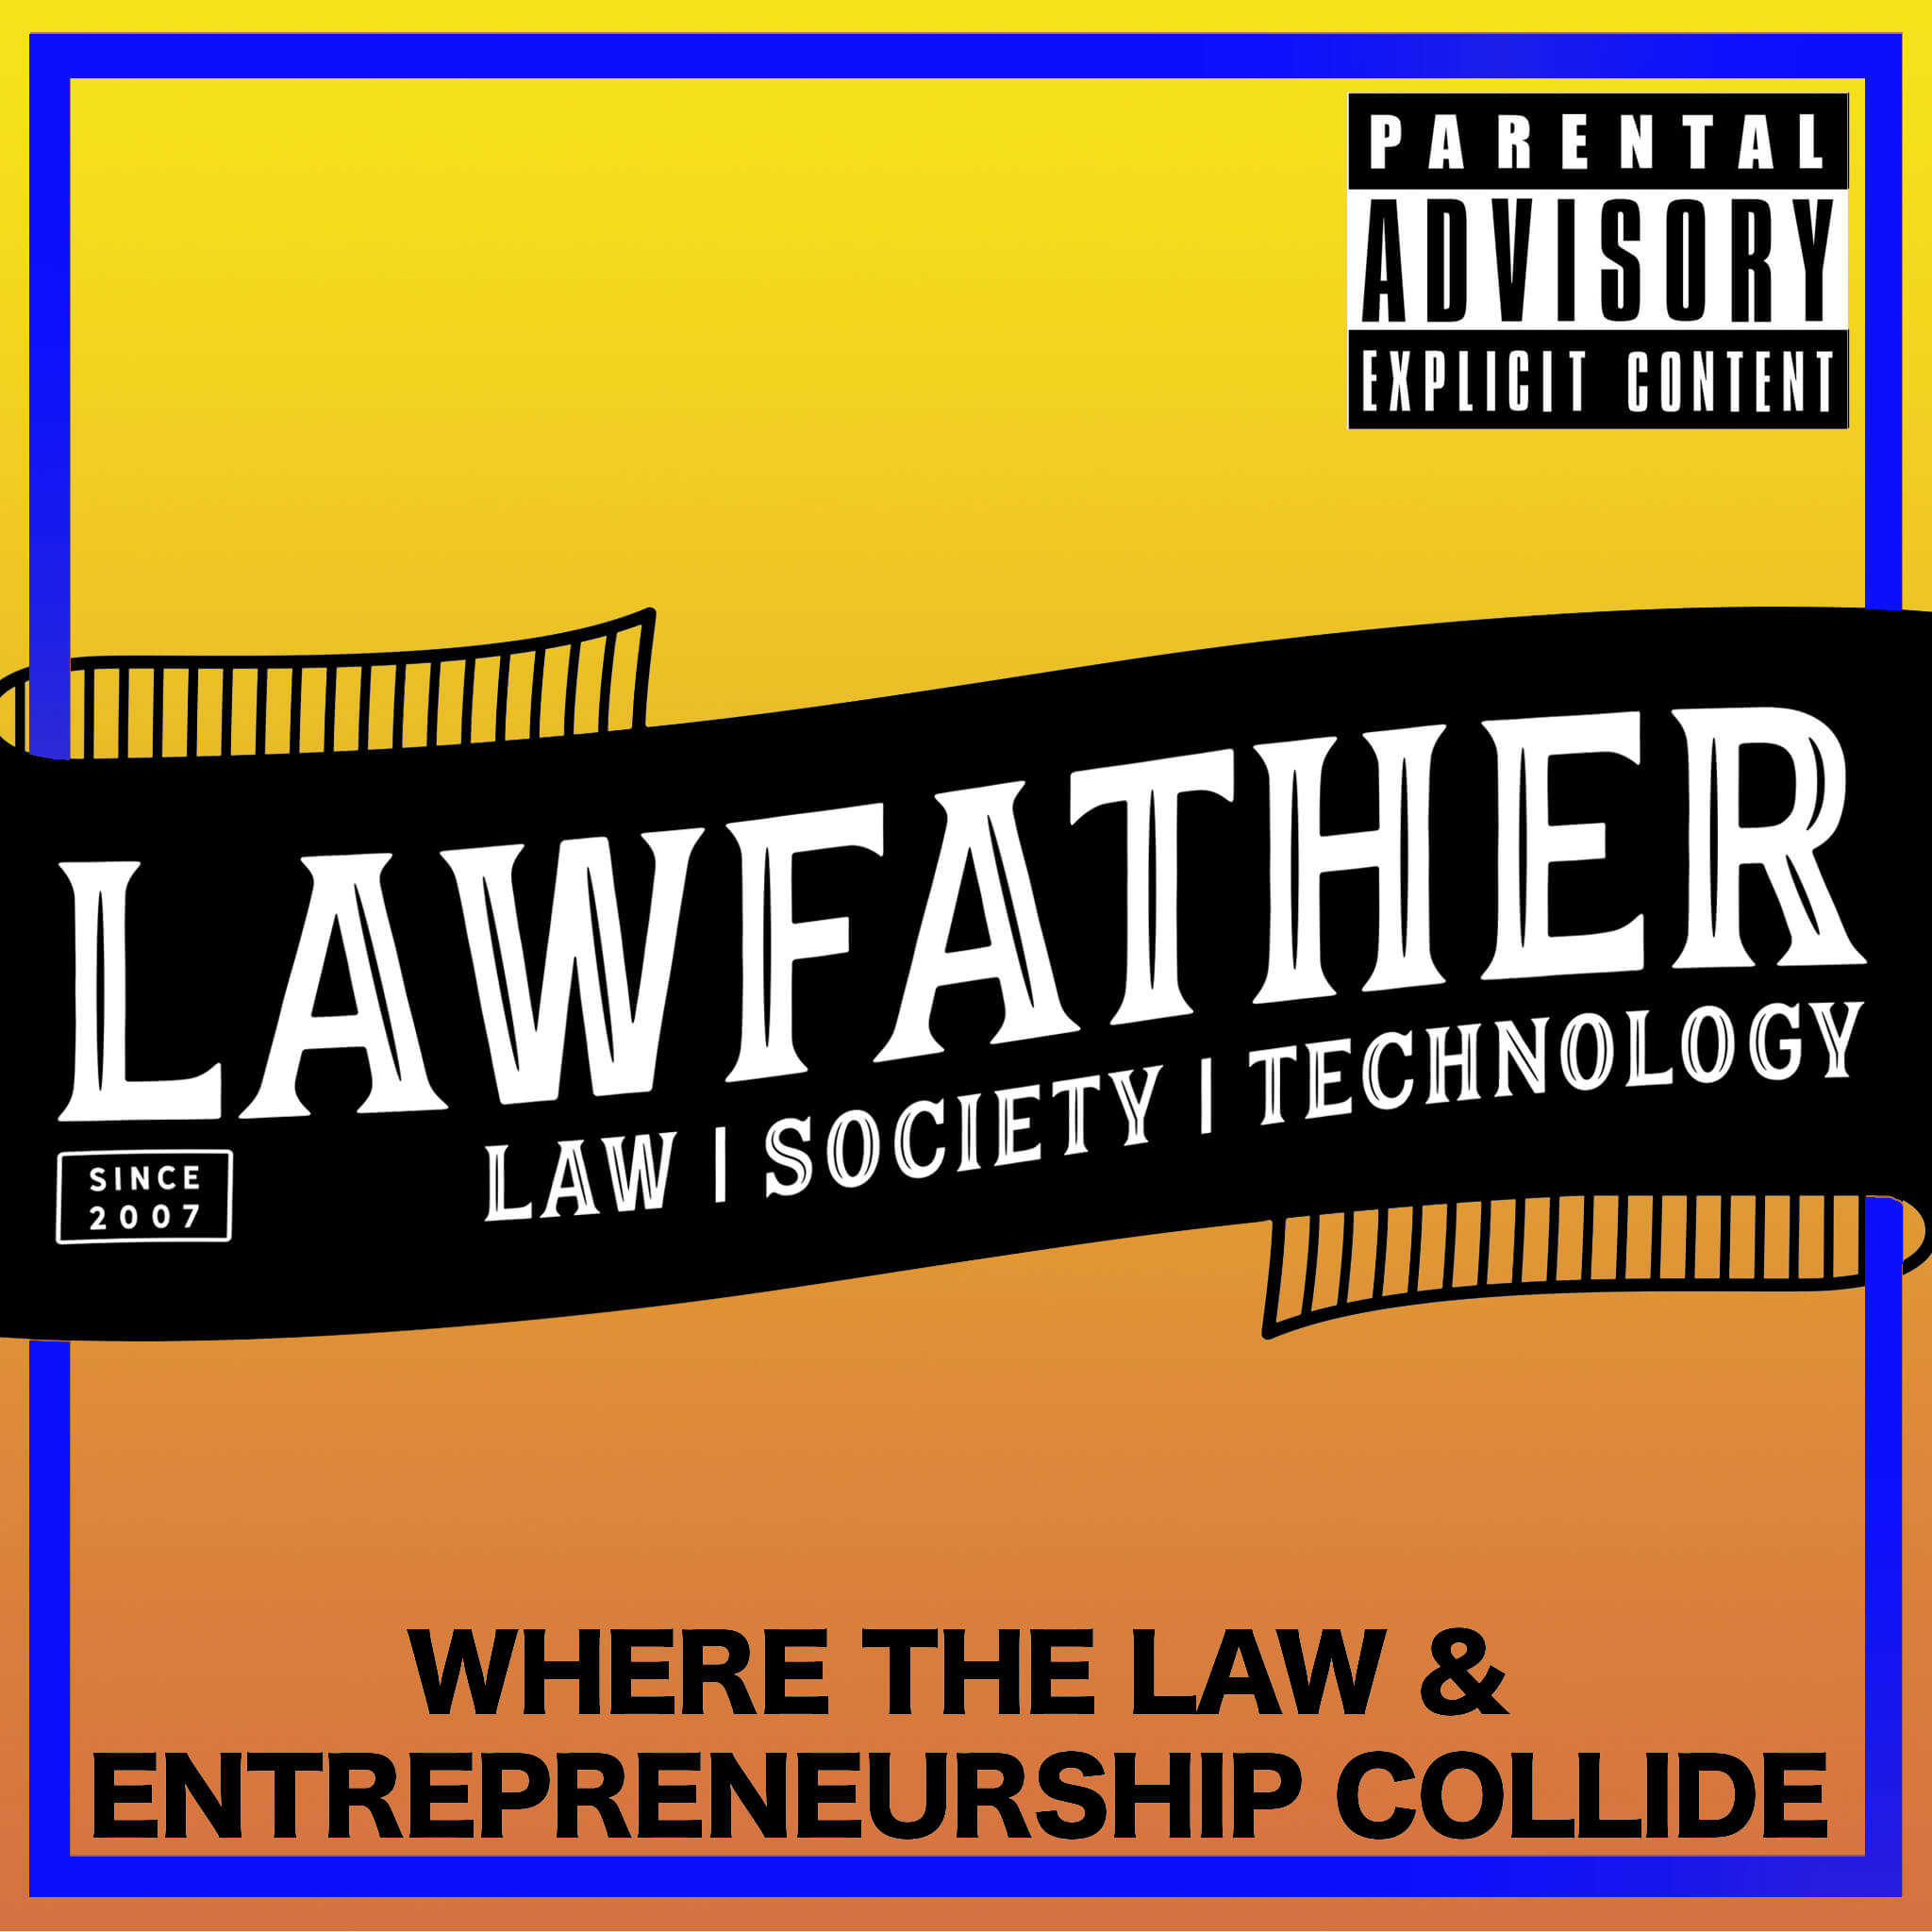 LawFather Podcast Episode 3 – Perceptions of Justice